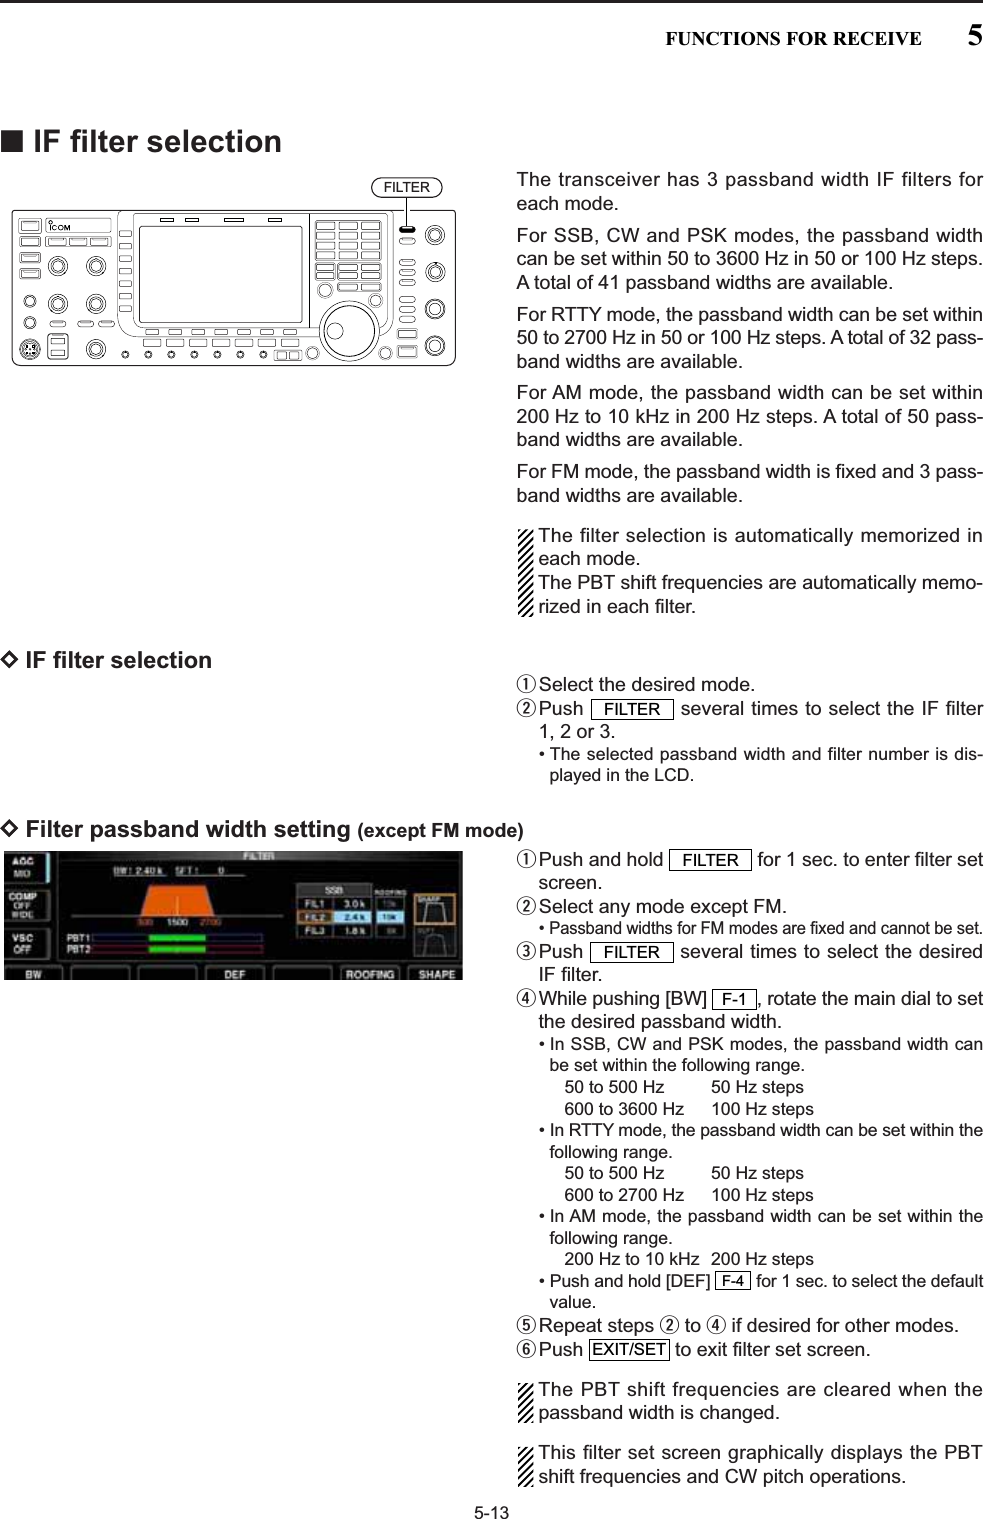 5-13■IF filter selectionThe transceiver has 3 passband width IF filters foreach mode. For SSB, CW and PSK modes, the passband widthcan be set within 50 to 3600 Hz in 50 or 100 Hz steps.A total of 41 passband widths are available. For RTTY mode, the passband width can be set within50 to 2700 Hz in 50 or 100 Hz steps. A total of 32 pass-band widths are available.For AM mode, the passband width can be set within200 Hz to 10 kHz in 200 Hz steps. A total of 50 pass-band widths are available.For FM mode, the passband width is fixed and 3 pass-band widths are available.The filter selection is automatically memorized ineach mode.The PBT shift frequencies are automatically memo-rized in each filter.DIF filter selectionqSelect the desired mode.wPush  several times to select the IF filter1, 2 or 3.• The selected passband width and filter number is dis-played in the LCD.DFilter passband width setting (except FM mode)qPush and hold  for 1 sec. to enter filter setscreen.wSelect any mode except FM.• Passband widths for FM modes are fixed and cannot be set.ePush  several times to select the desiredIF filter.rWhile pushing [BW]  , rotate the main dial to setthe desired passband width.• In SSB, CW and PSK modes, the passband width canbe set within the following range.50 to 500 Hz  50 Hz steps600 to 3600 Hz  100 Hz steps• In RTTY mode, the passband width can be set within thefollowing range.50 to 500 Hz  50 Hz steps600 to 2700 Hz  100 Hz steps• In AM mode, the passband width can be set within thefollowing range.200 Hz to 10 kHz  200 Hz steps• Push and hold [DEF]  for 1 sec. to select the defaultvalue.tRepeat steps wto rif desired for other modes.yPush  to exit filter set screen.The PBT shift frequencies are cleared when thepassband width is changed.This filter set screen graphically displays the PBTshift frequencies and CW pitch operations.EXIT/SETF-4F-1FILTERFILTERFILTERFILTER5FUNCTIONS FOR RECEIVE